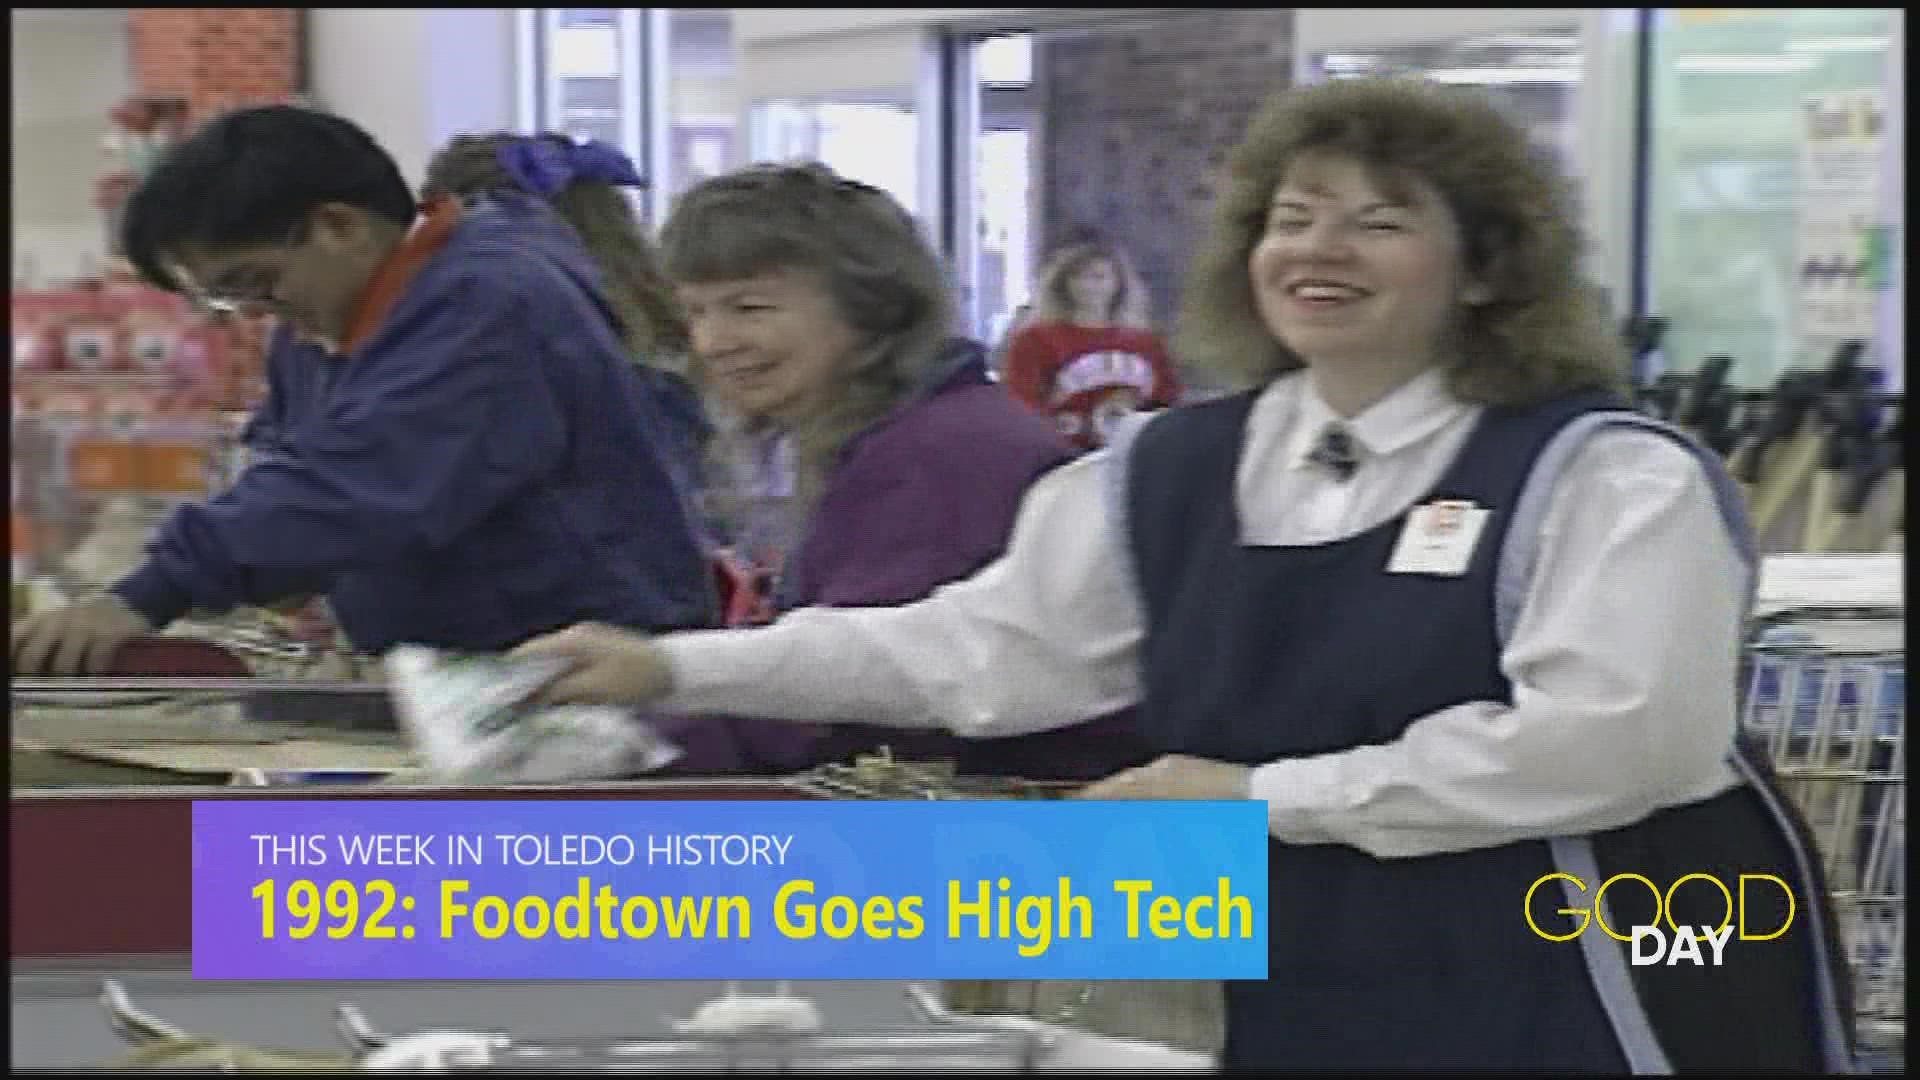 Diane Woodring looks back on Foodtown, a classic Toledo grocery store that began using modern shopping tech in the early 1990s.